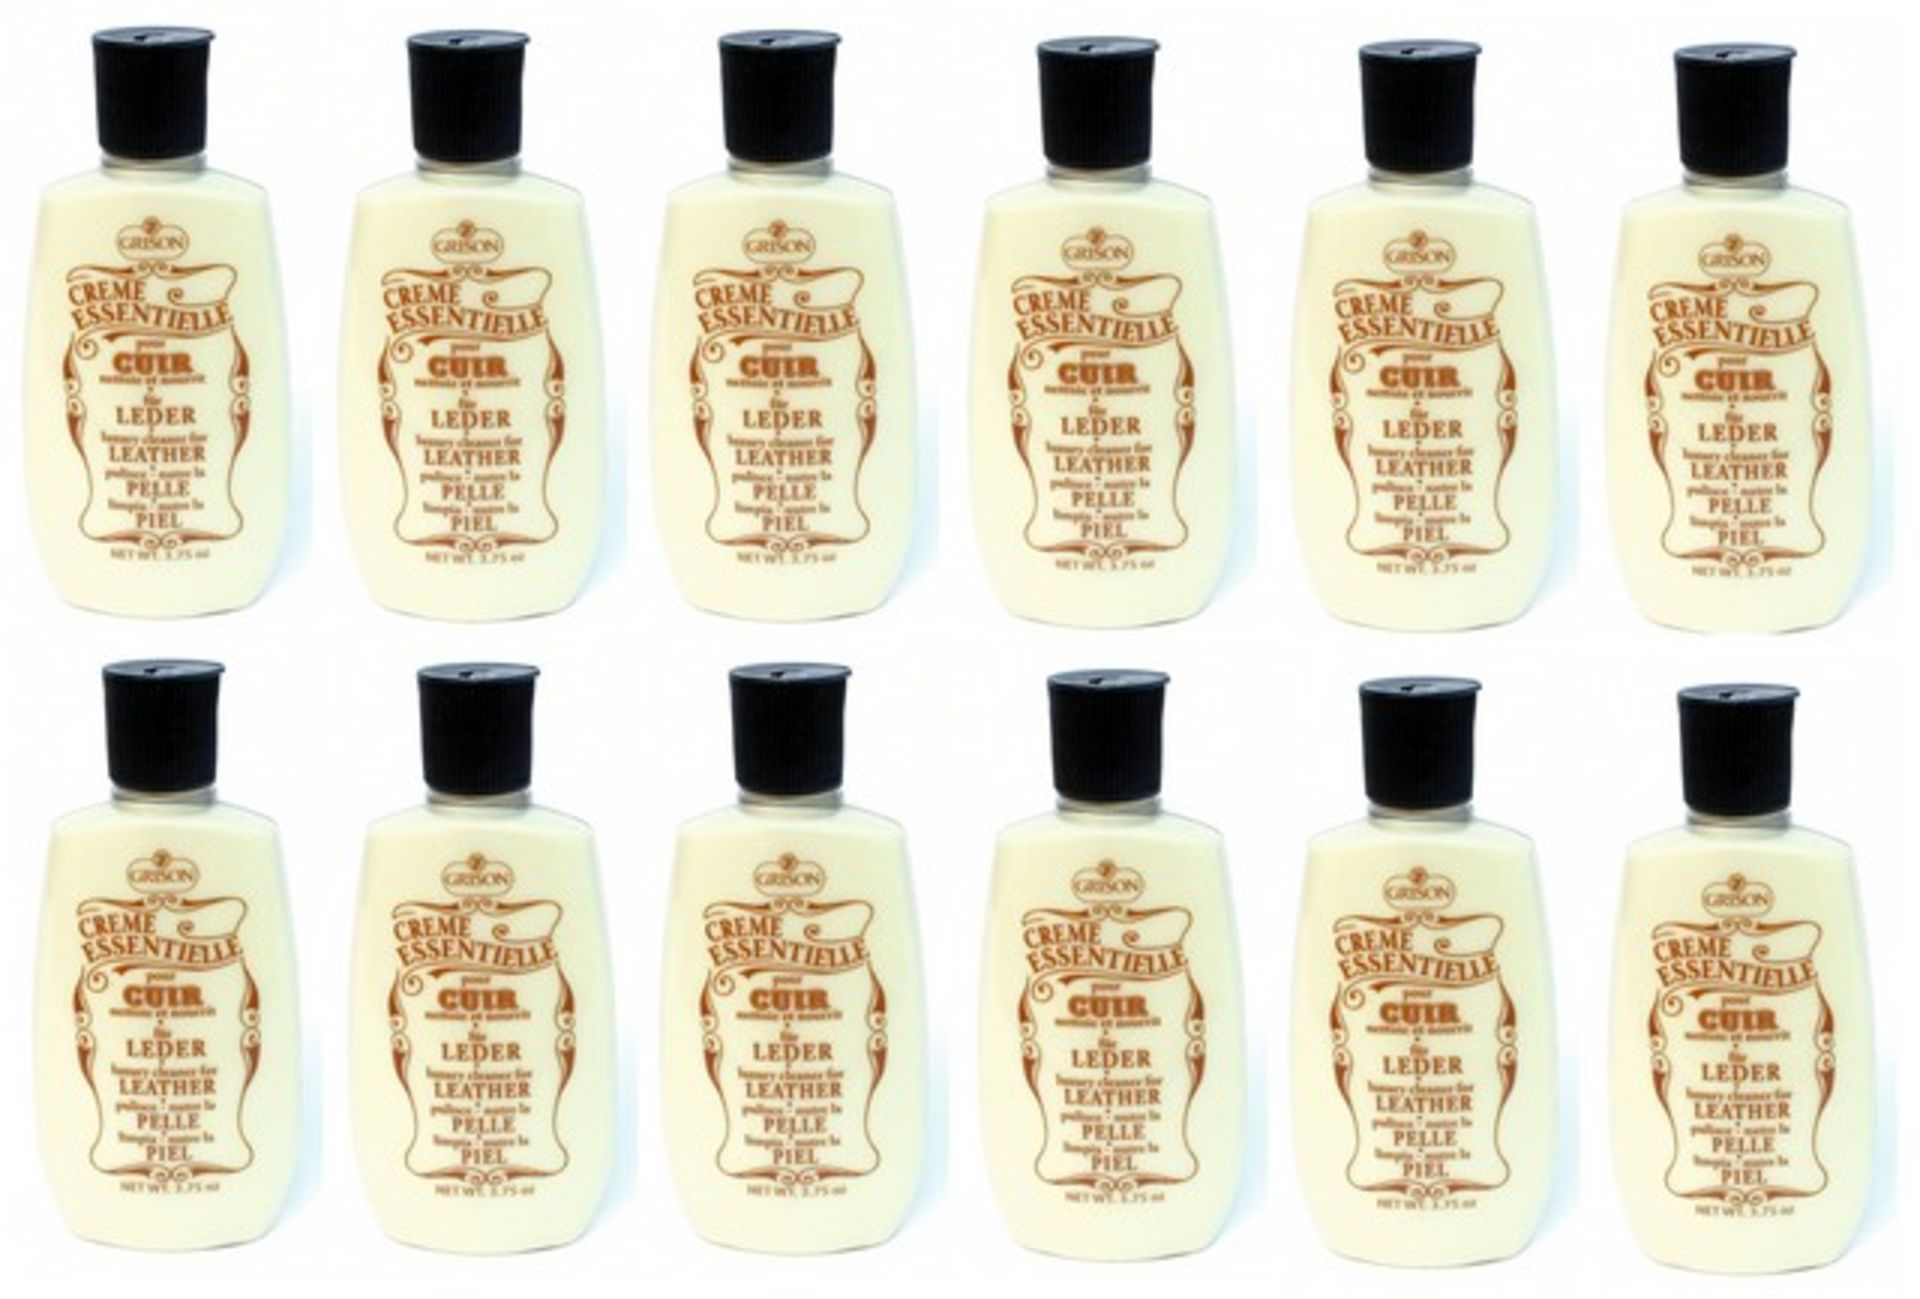 V Brand New A Box of Twelve Luxury Leather Cleaner3.75Oz Creme Essentielle Leather Cleaner ISP 7.